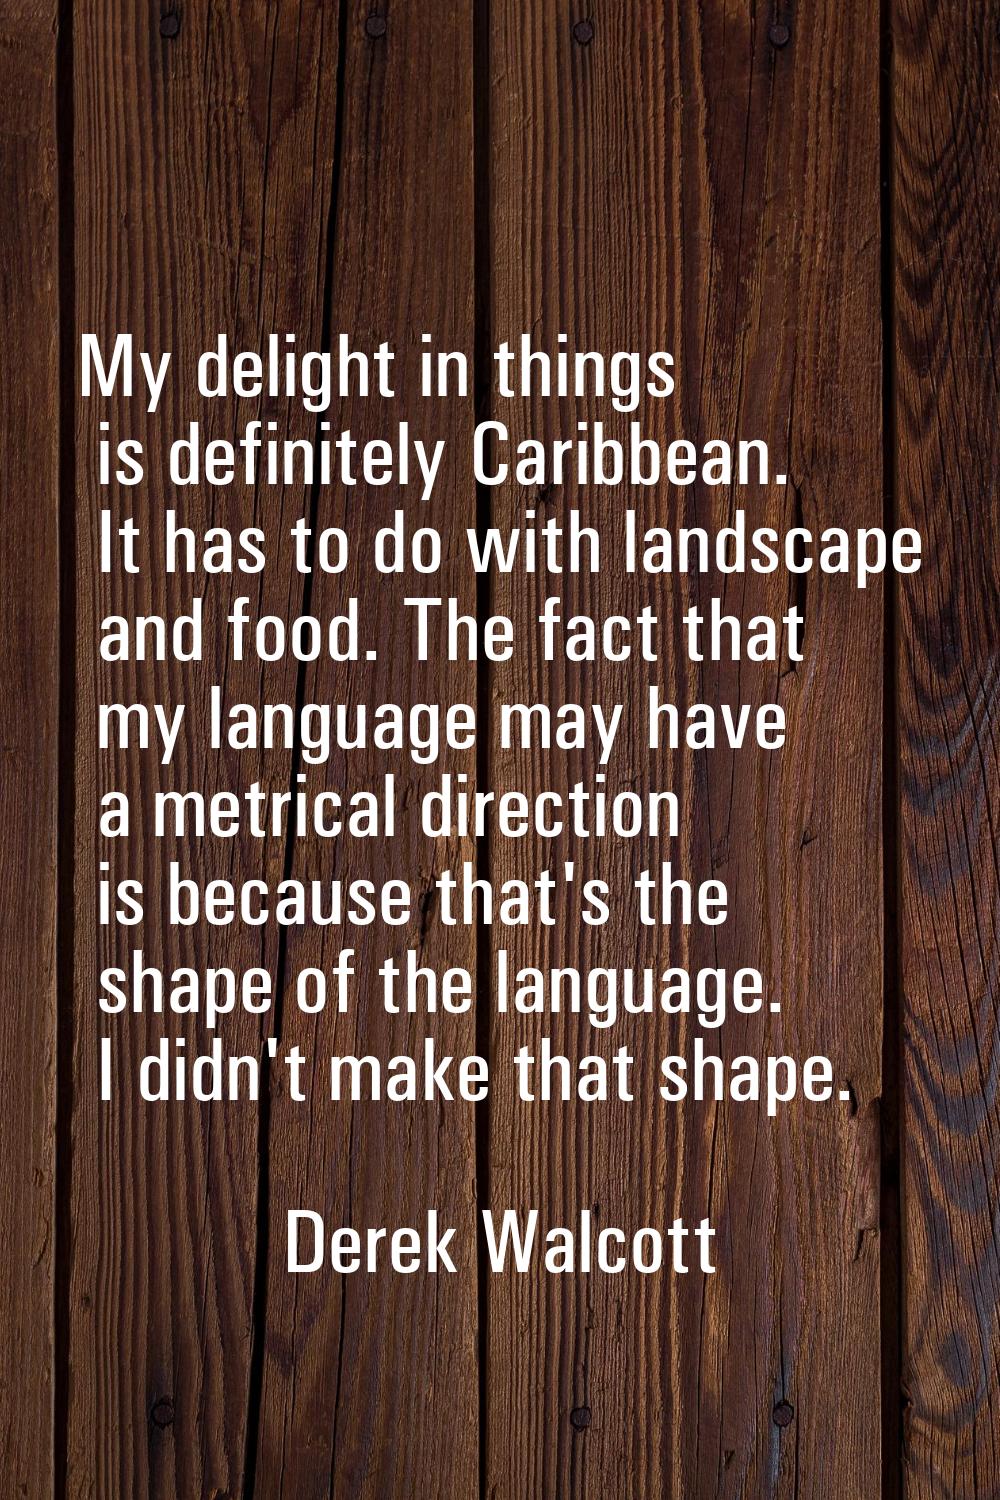 My delight in things is definitely Caribbean. It has to do with landscape and food. The fact that m